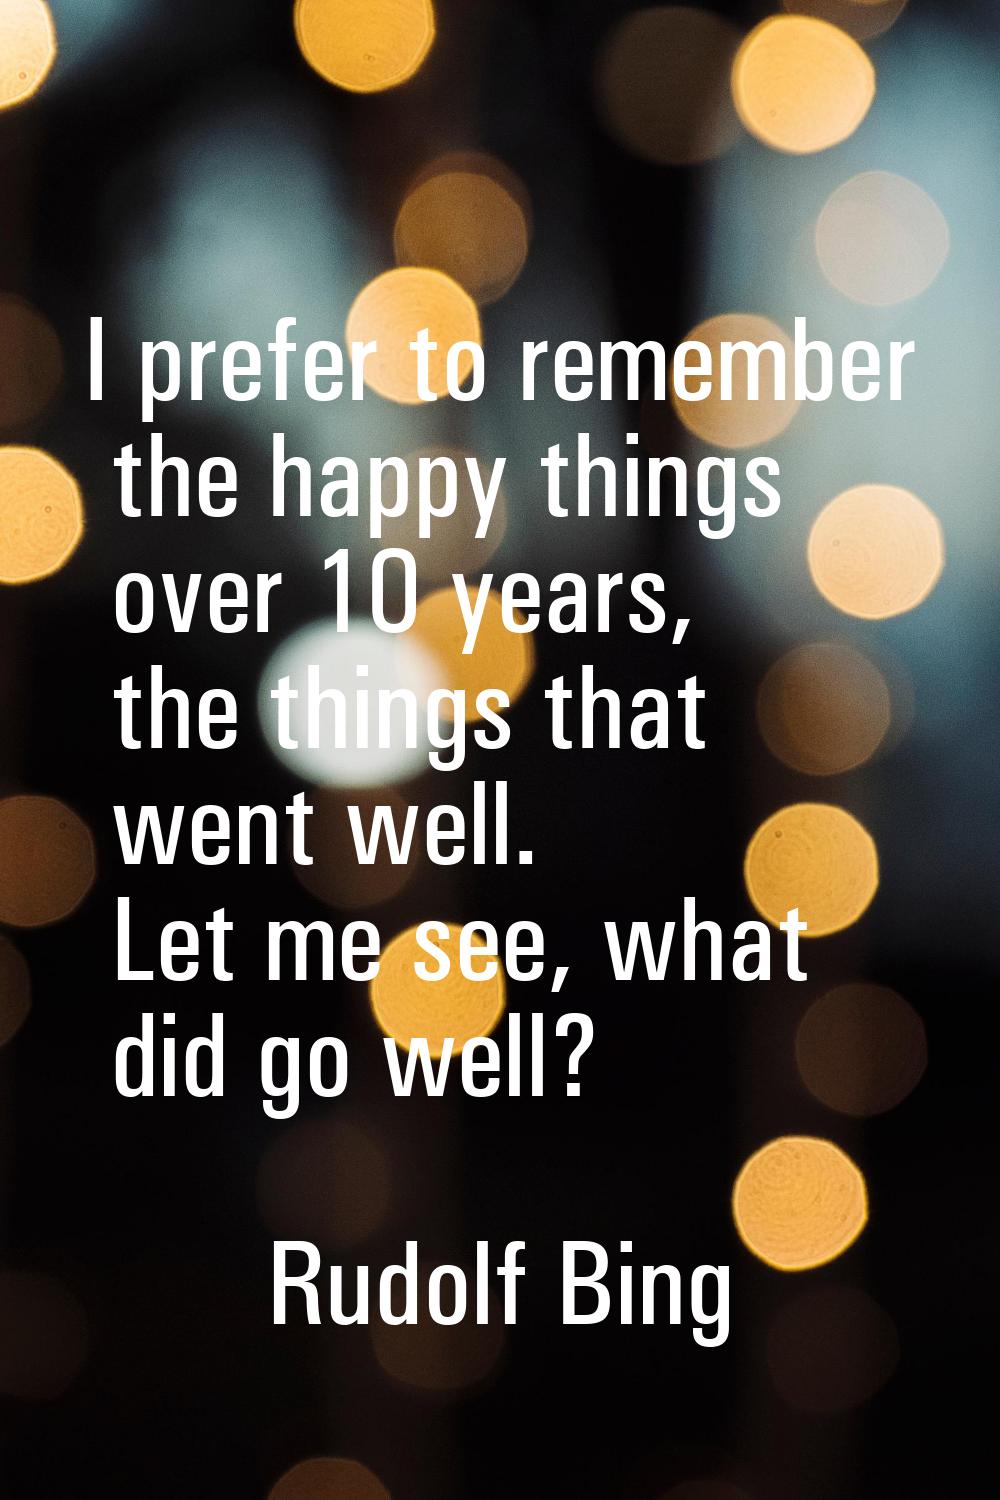 I prefer to remember the happy things over 10 years, the things that went well. Let me see, what di